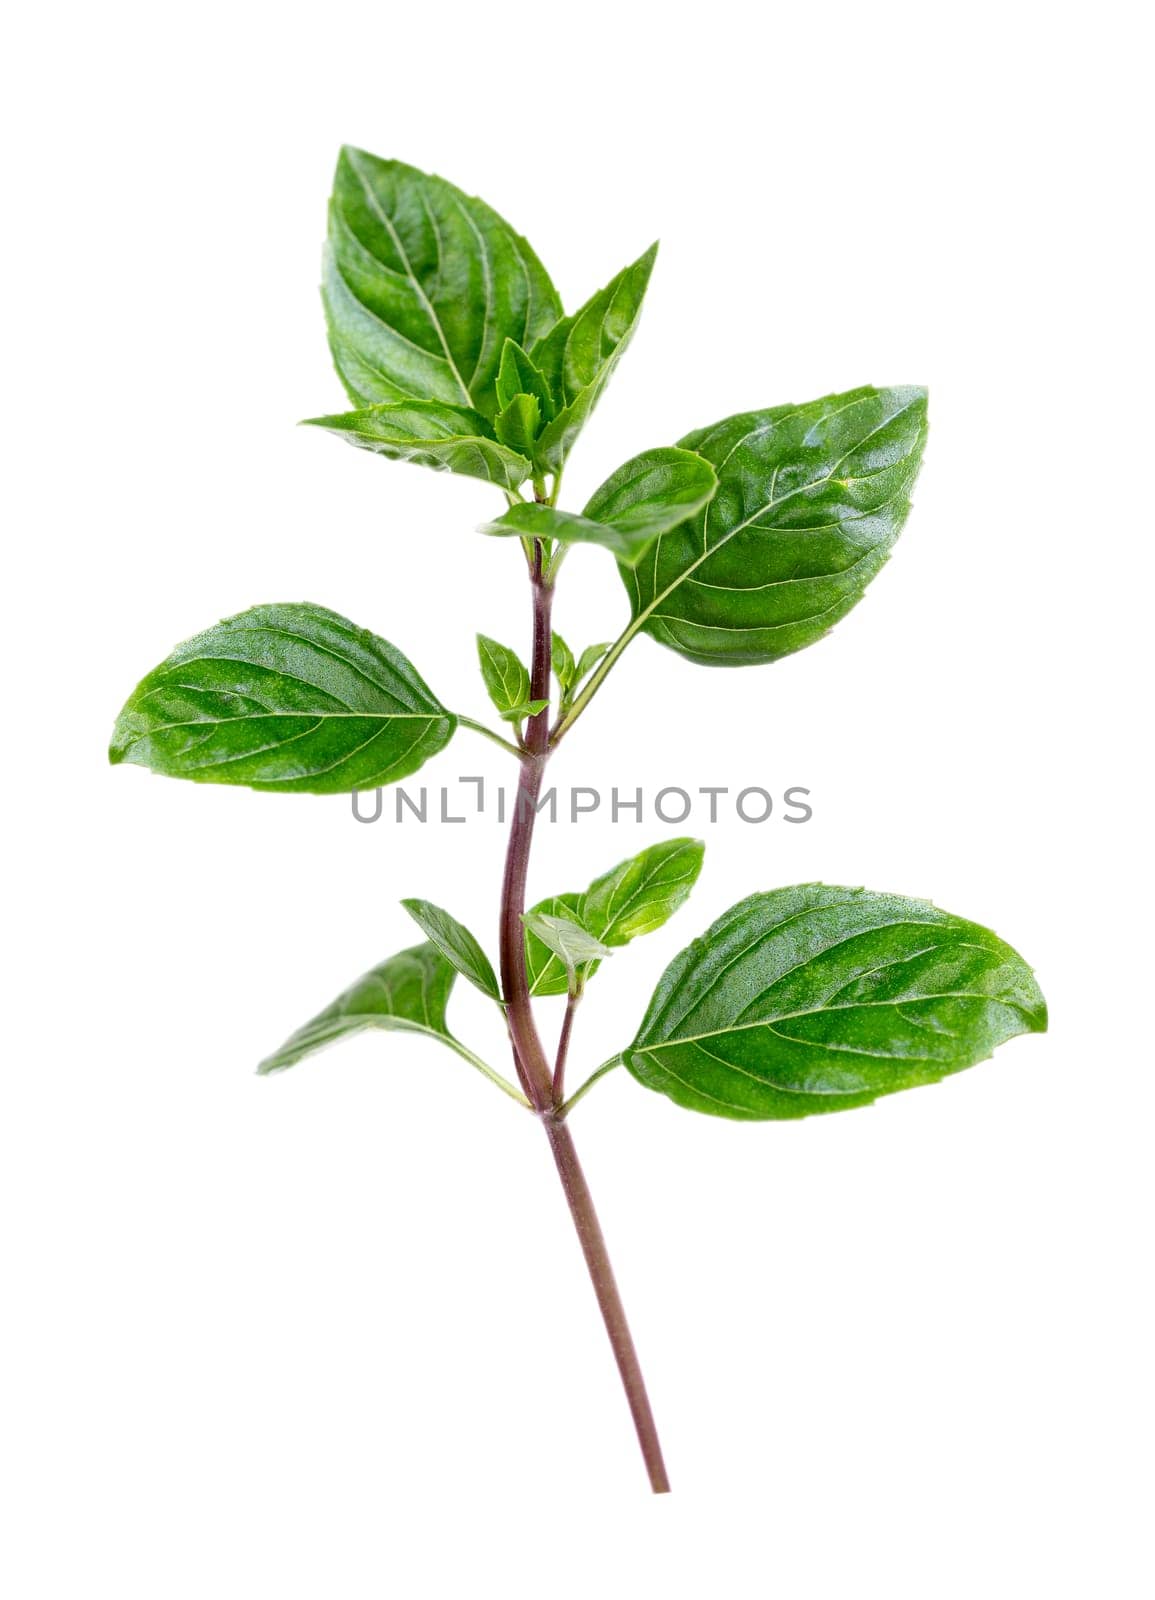 Red rubin basil bush This basil variety has unusual reddish-purple leaves, and a stronger flavour than sweet basil, on white background PNG file by JPC-PROD